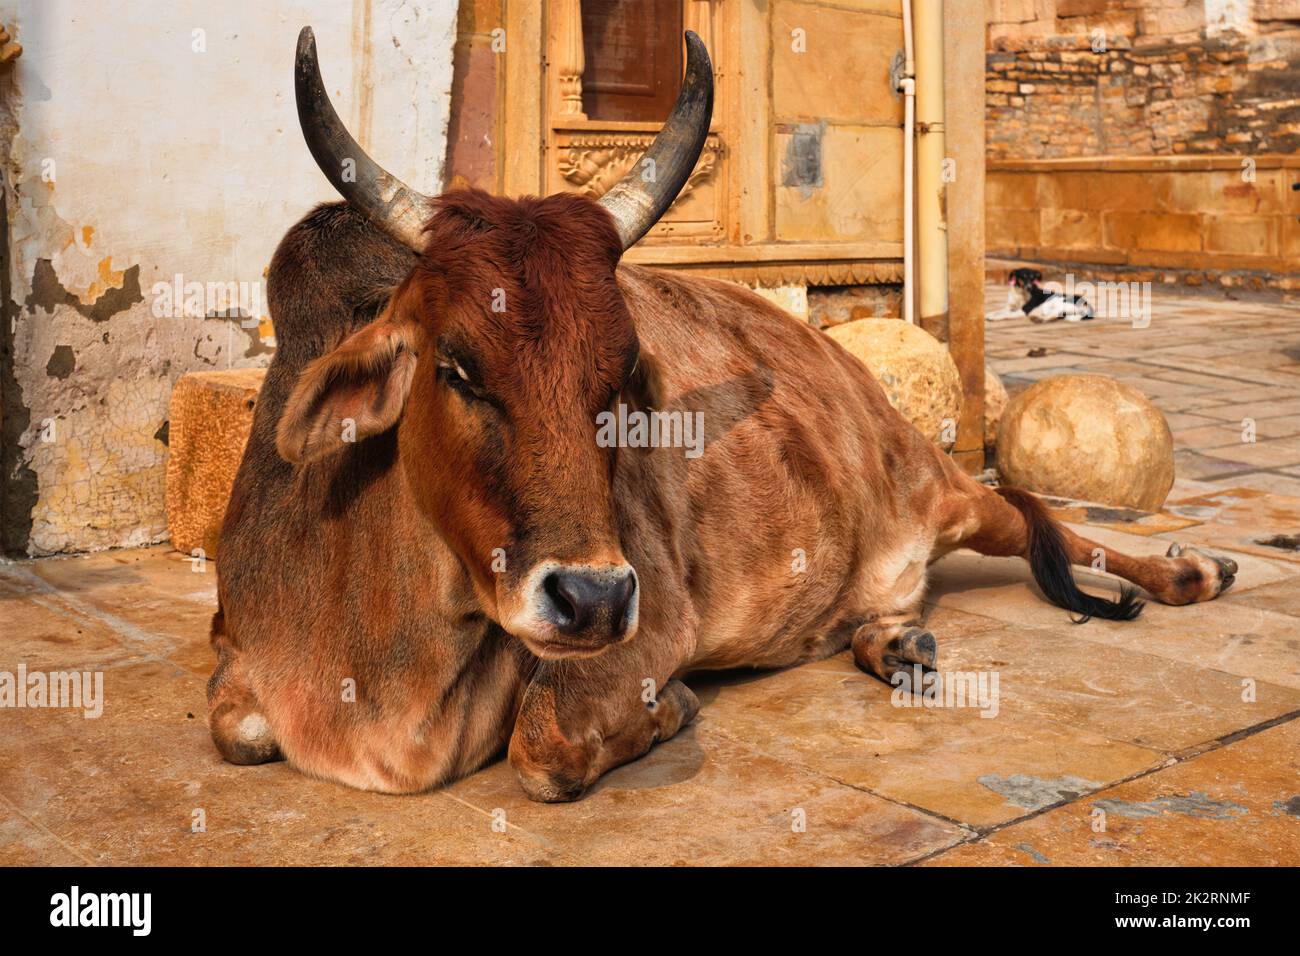 Indian cow resting in the street Stock Photo